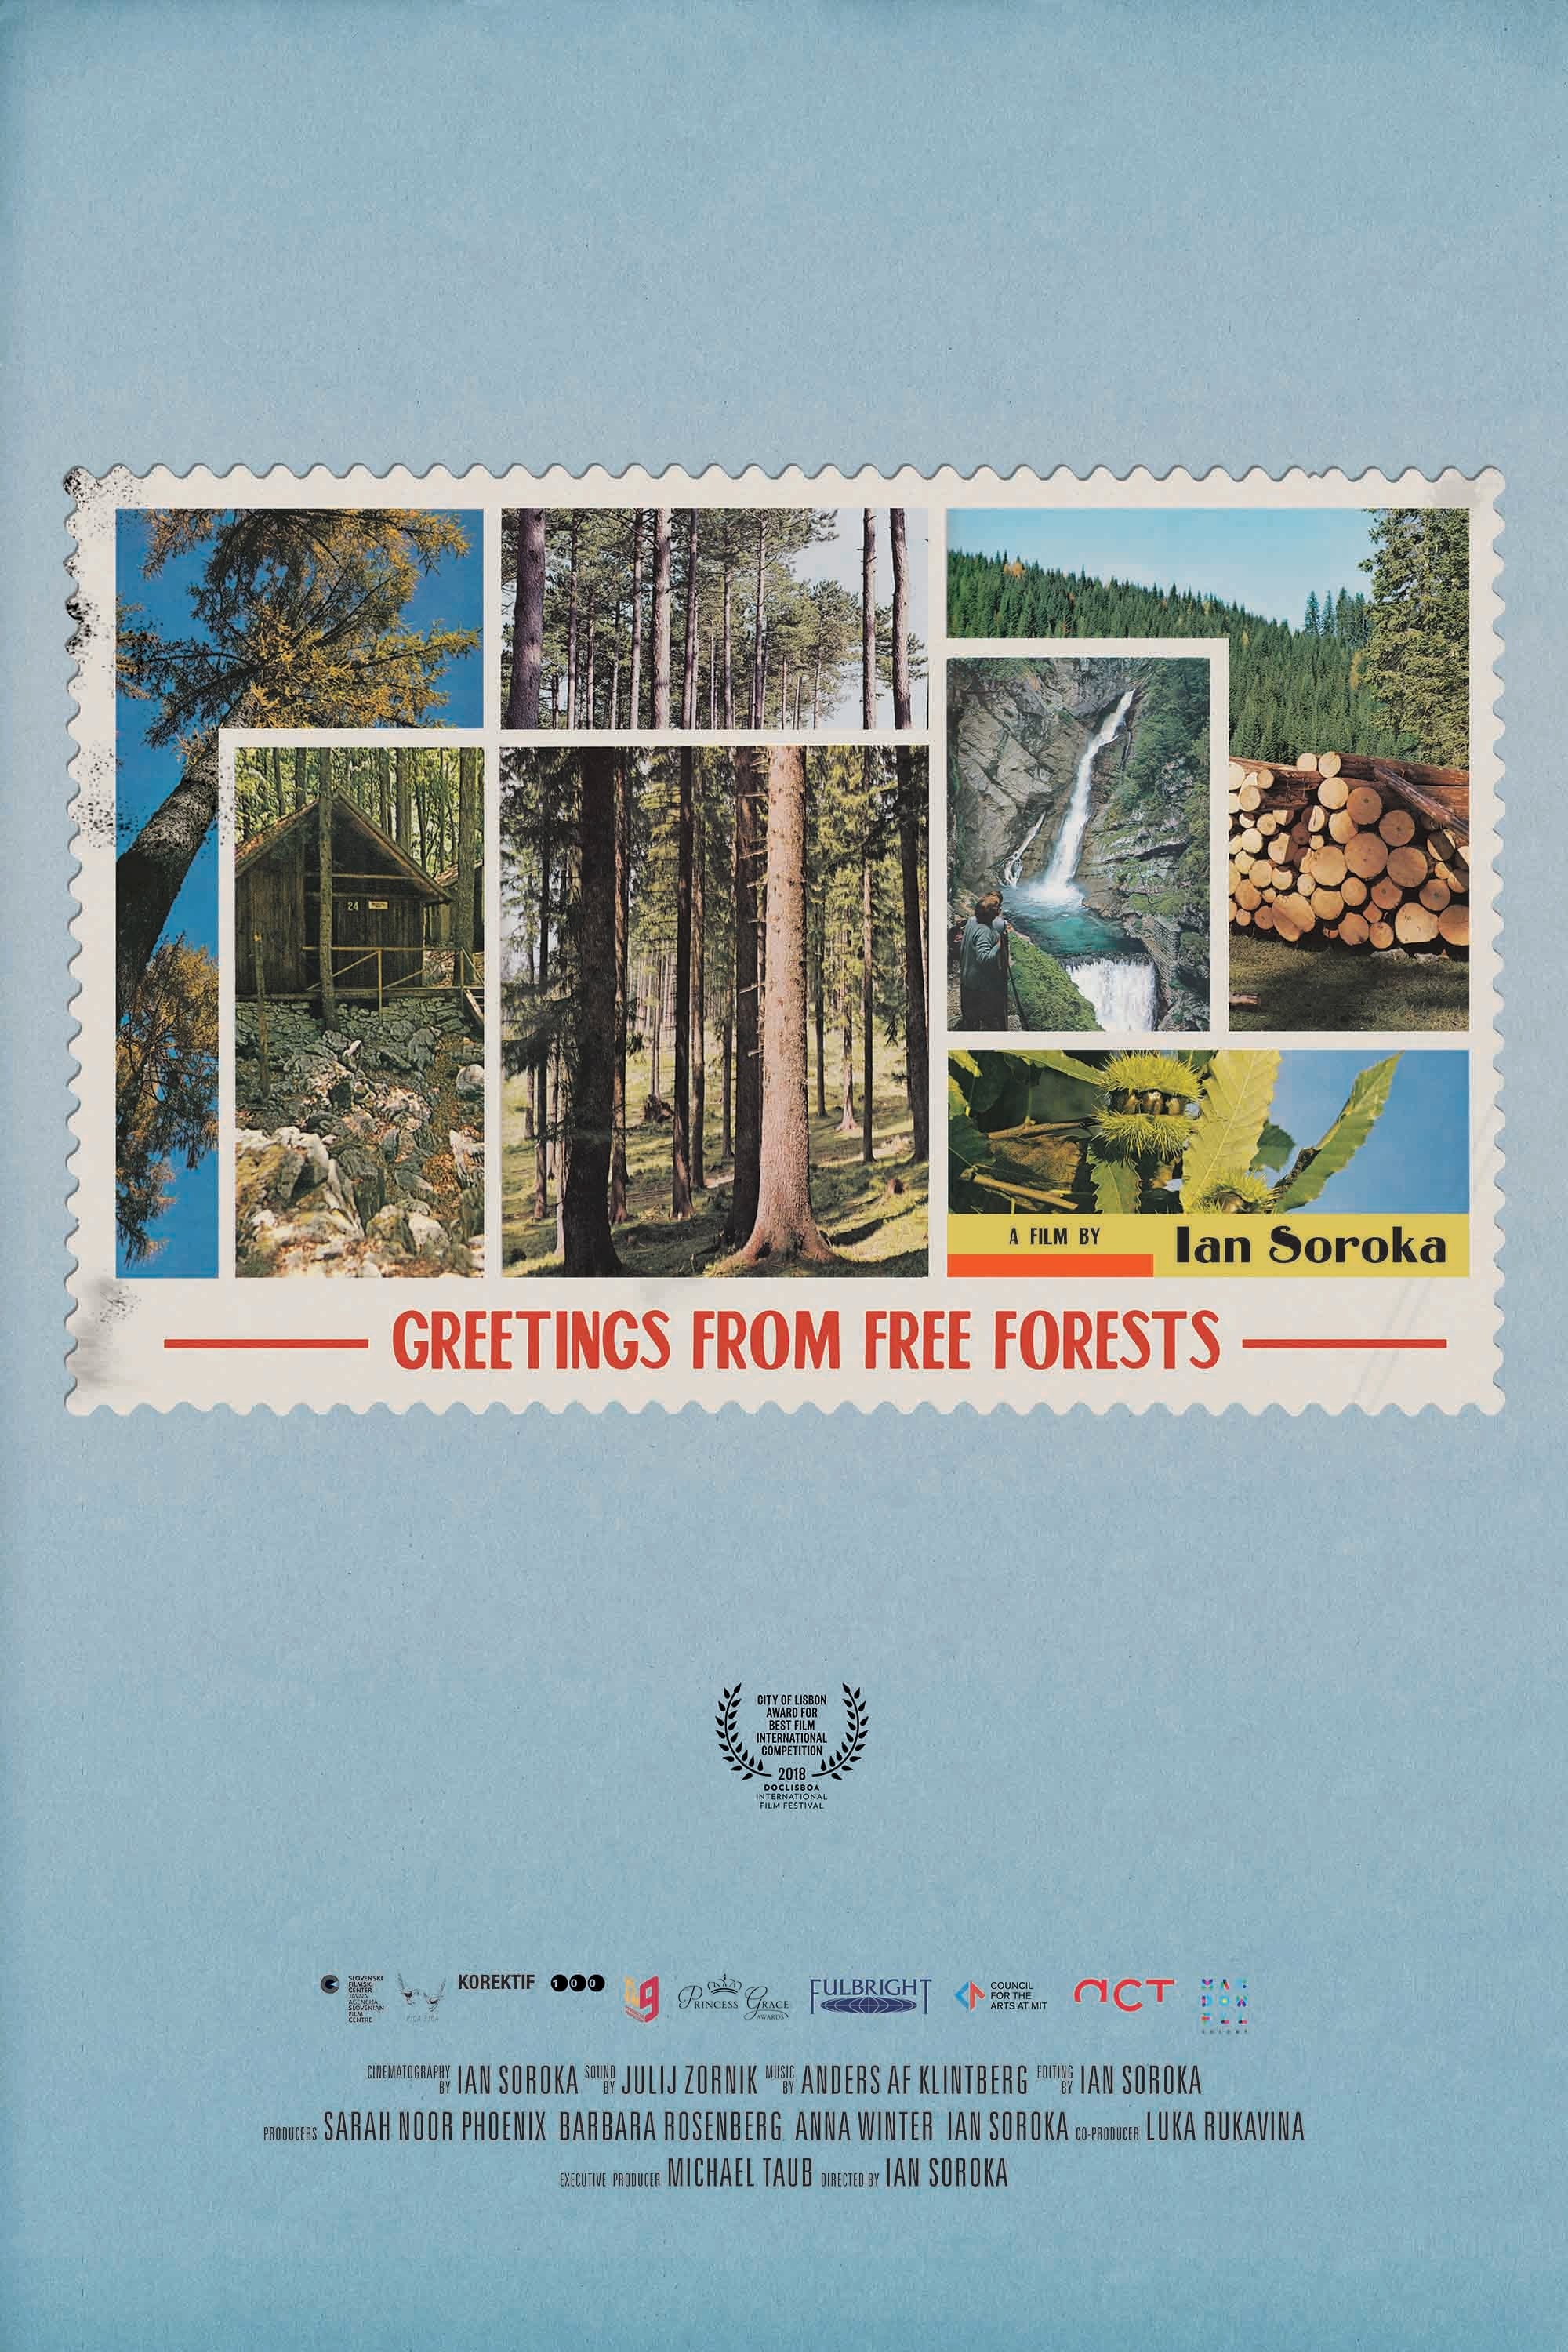 Greetings from Free Forests